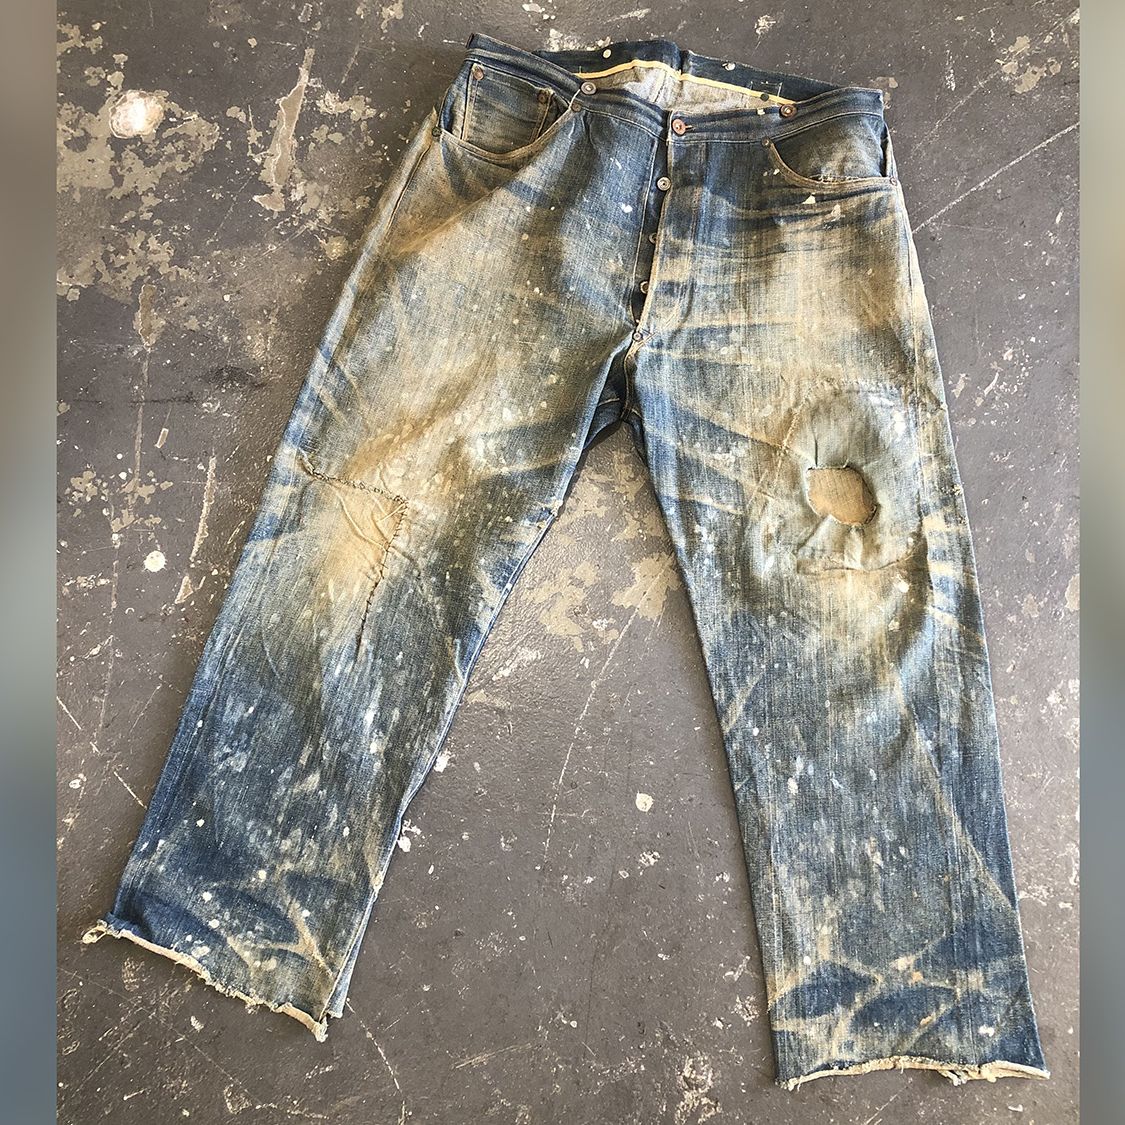 Behandling Armstrong Atticus 19th-century Levi's jeans found in mine shaft sell for over $87,000 | CNN